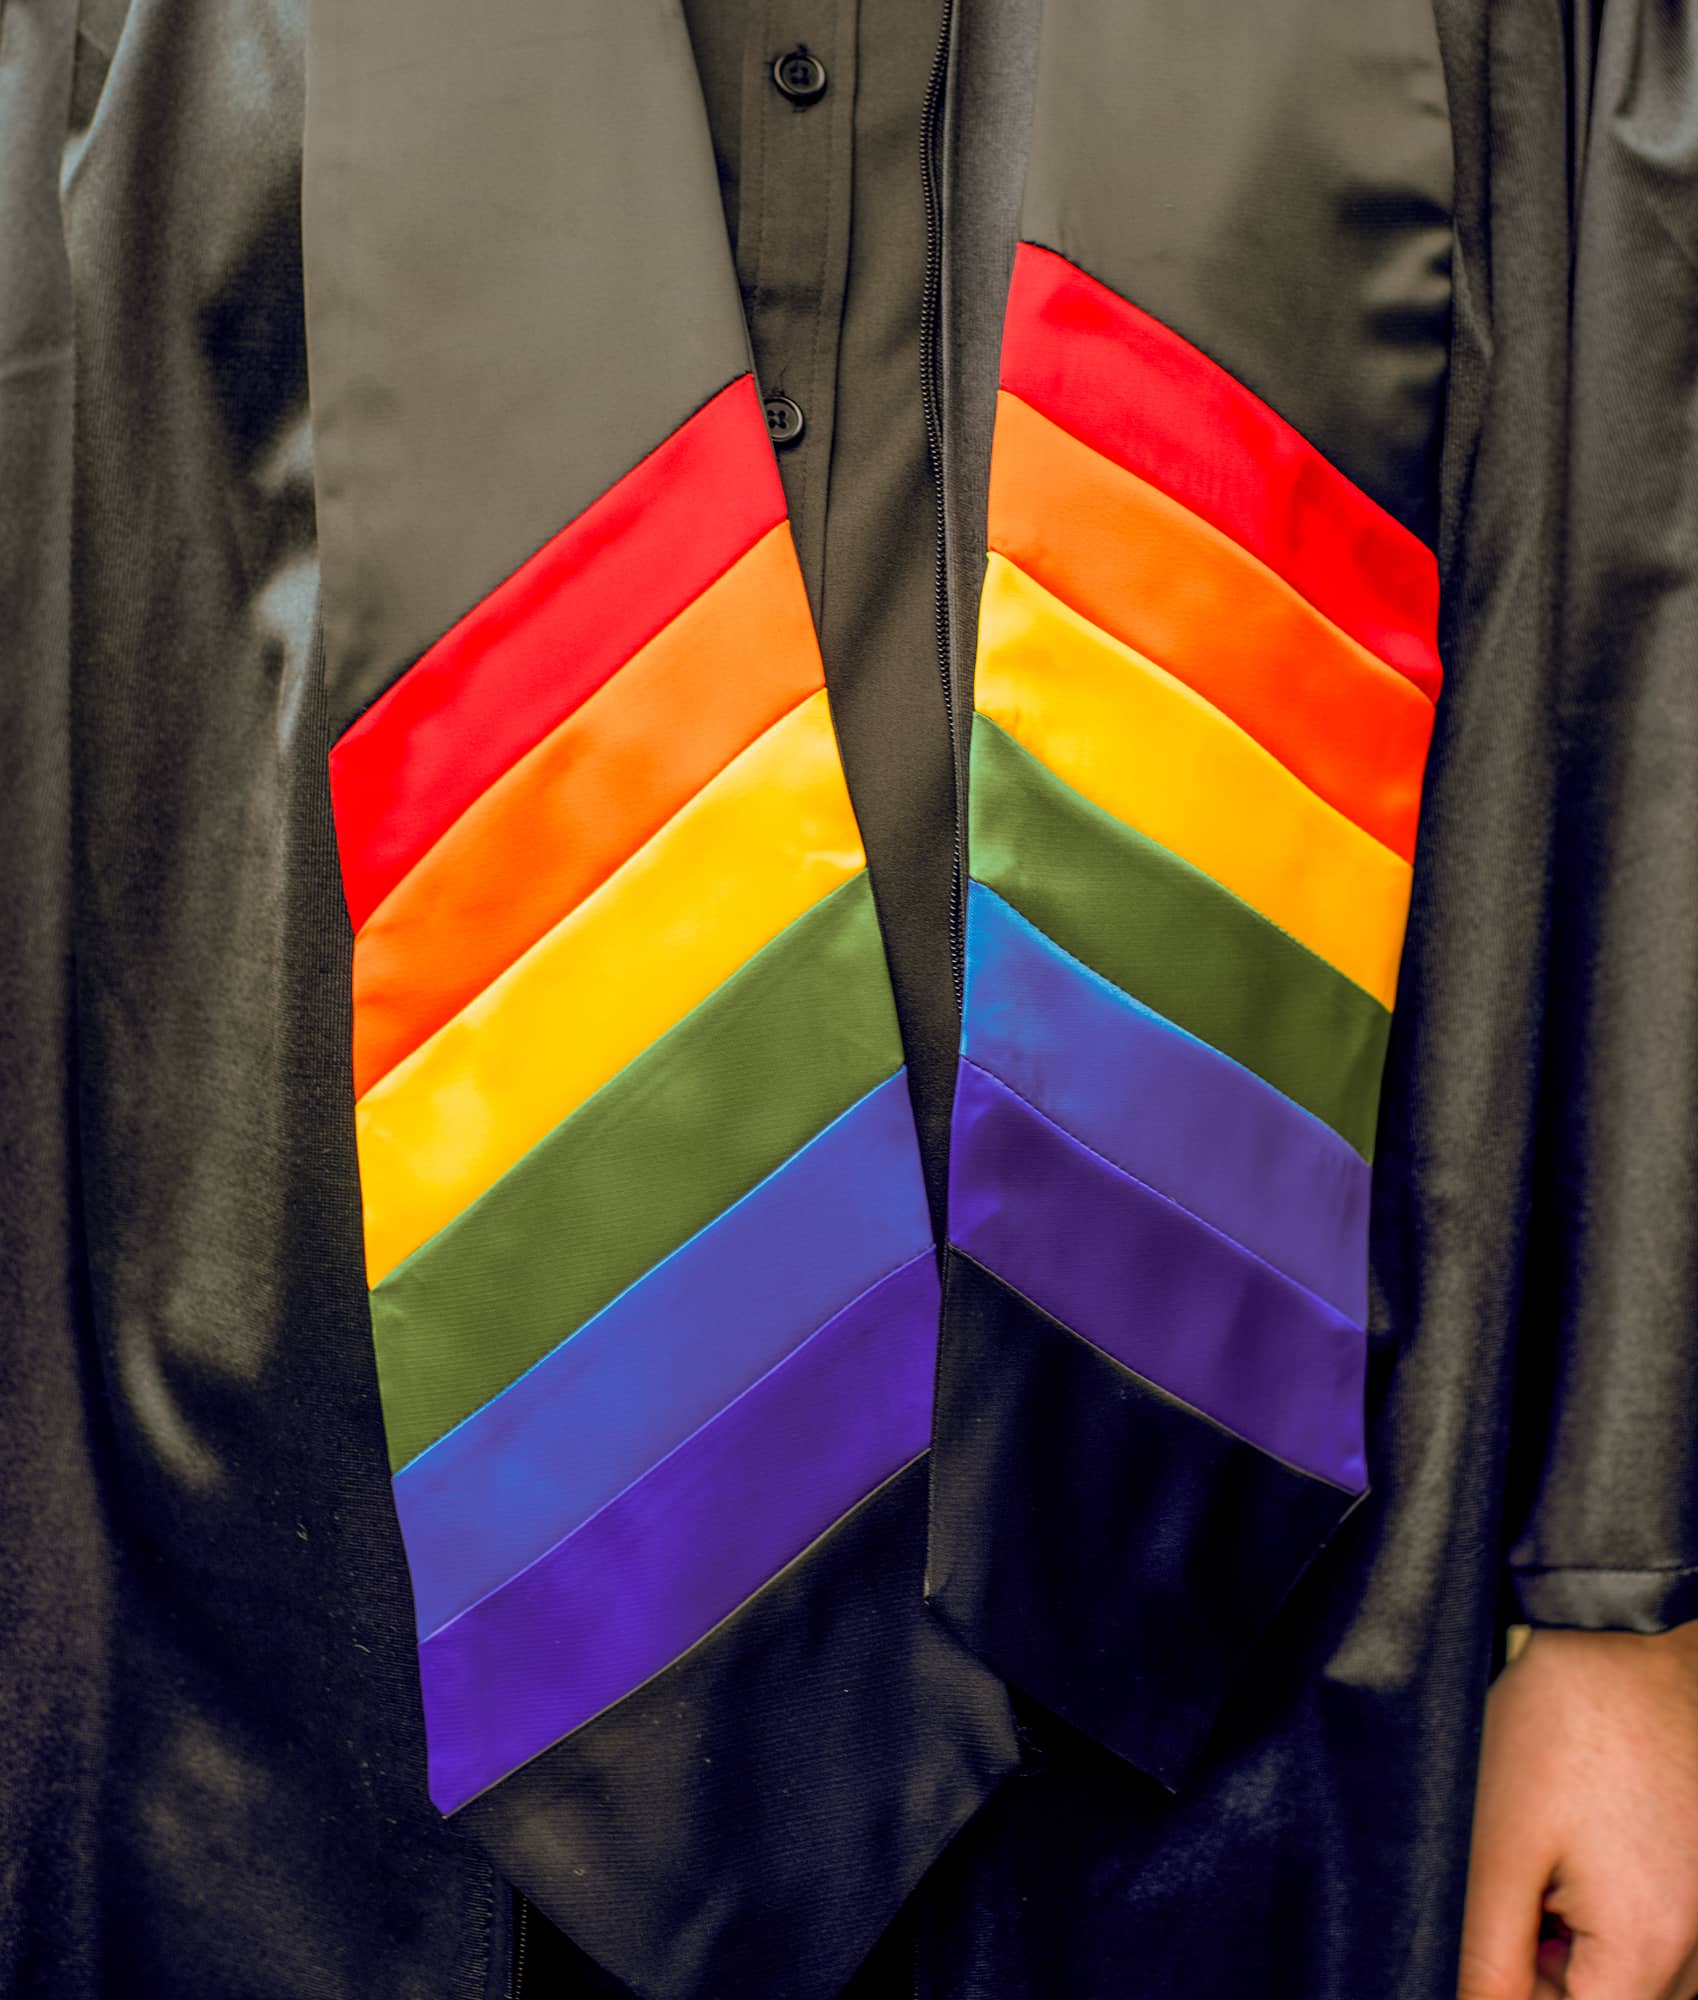 A student wears a rainbow honor stole at graduate commencement.